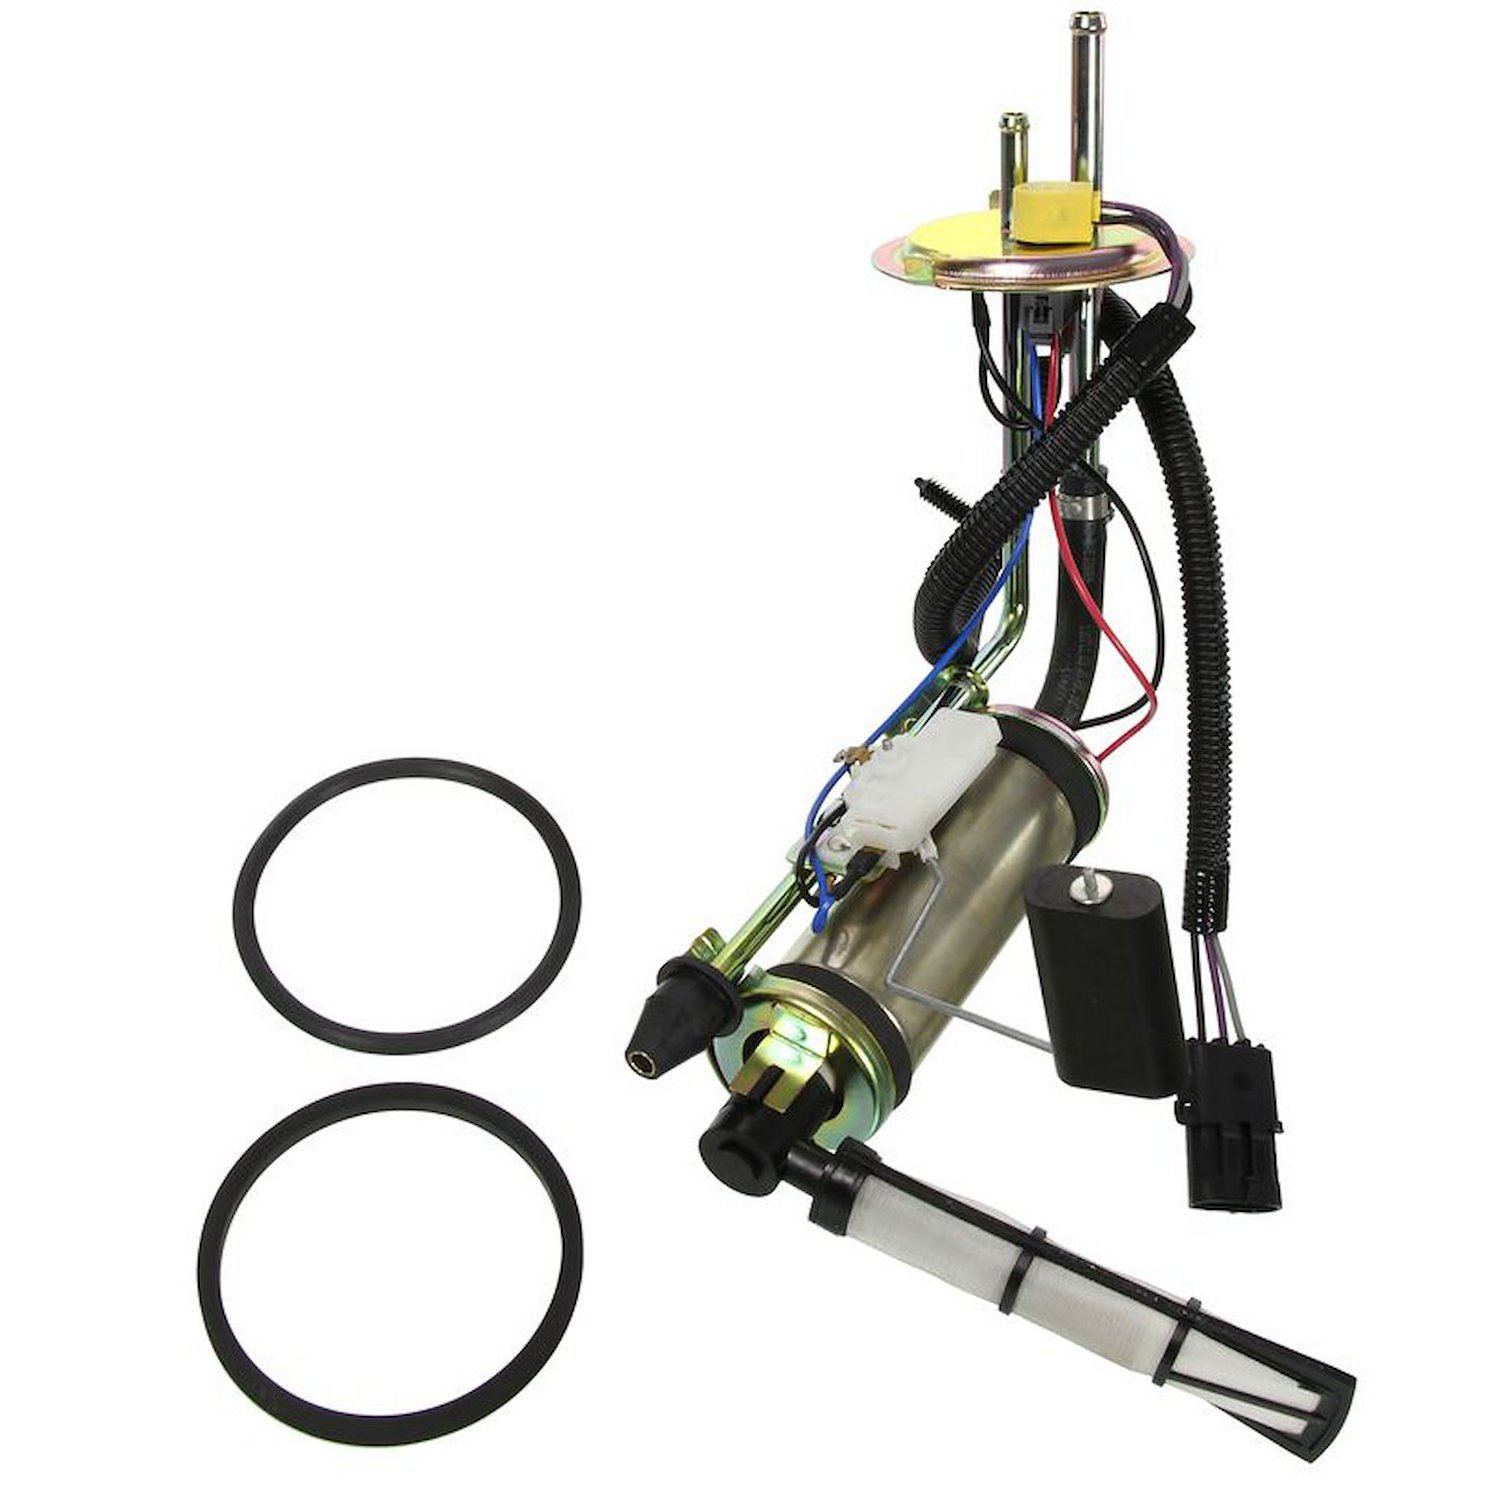 OE Chrysler/Dodge/Jeep Replacement Fuel Pump Module Assembly for 1987-1990 Jeep Cherokee/Wagoneer